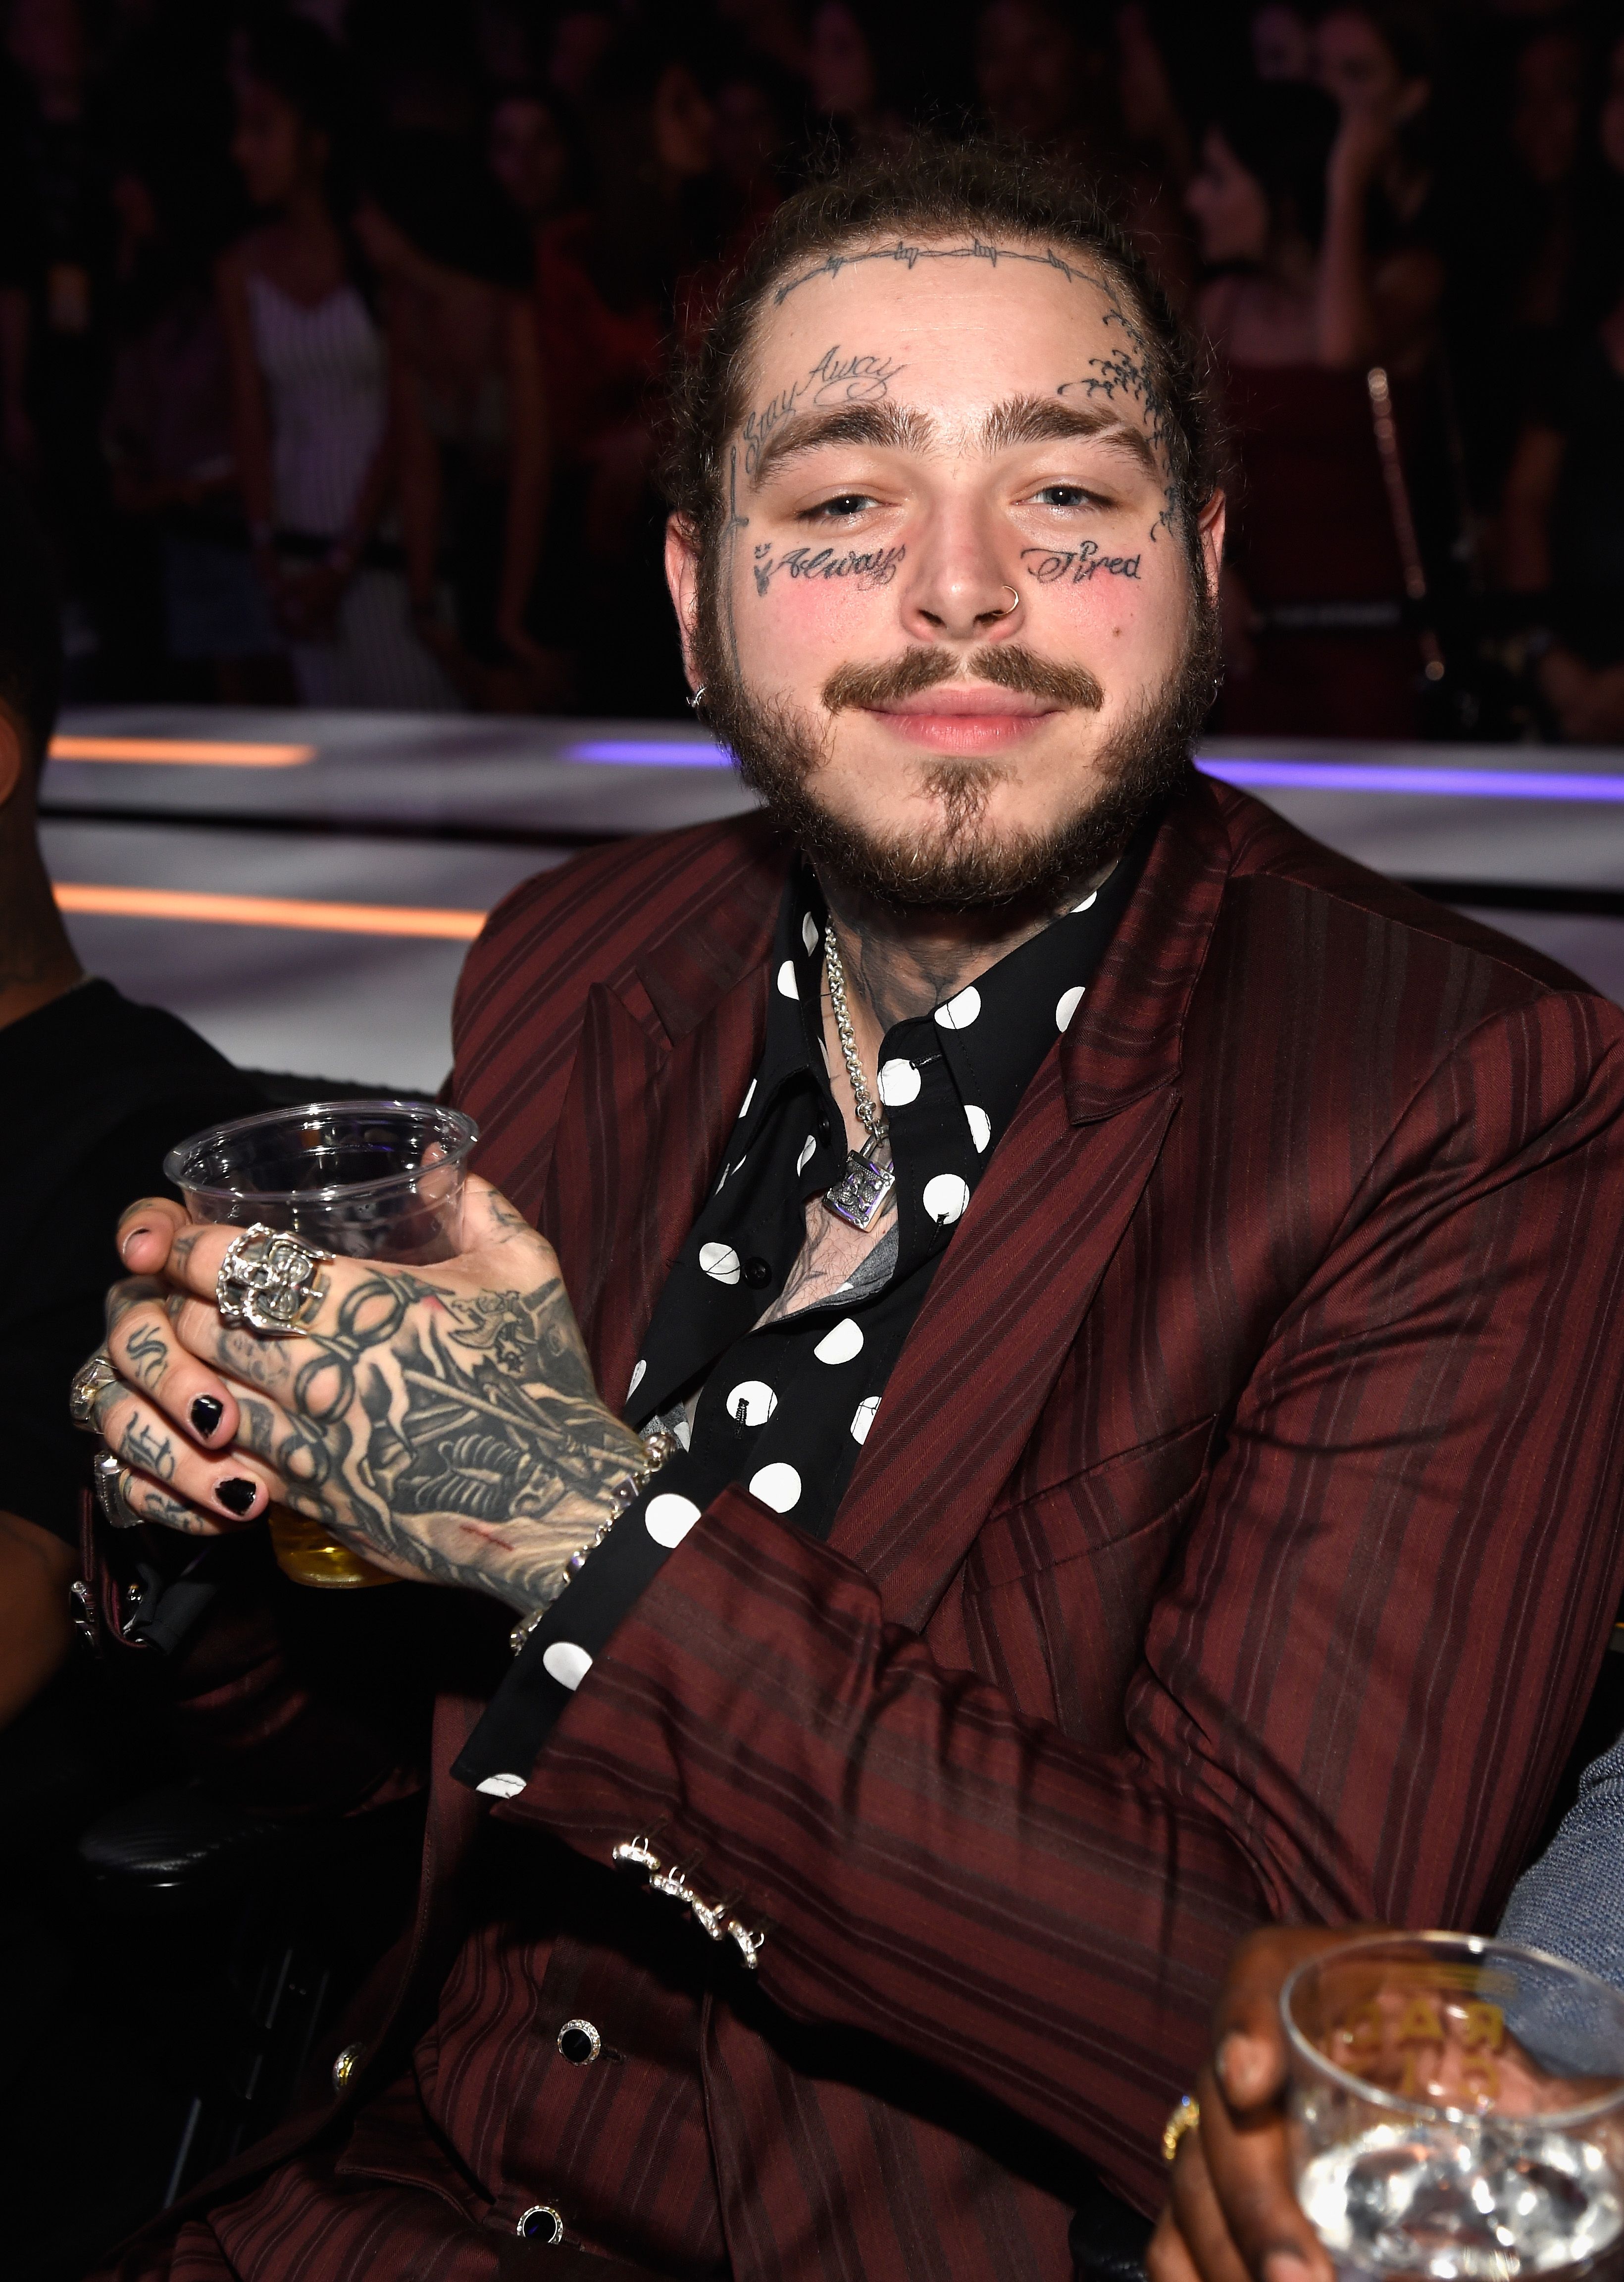 Post Malone Lady Gaga cash in during Super Bowl 2020 weekend